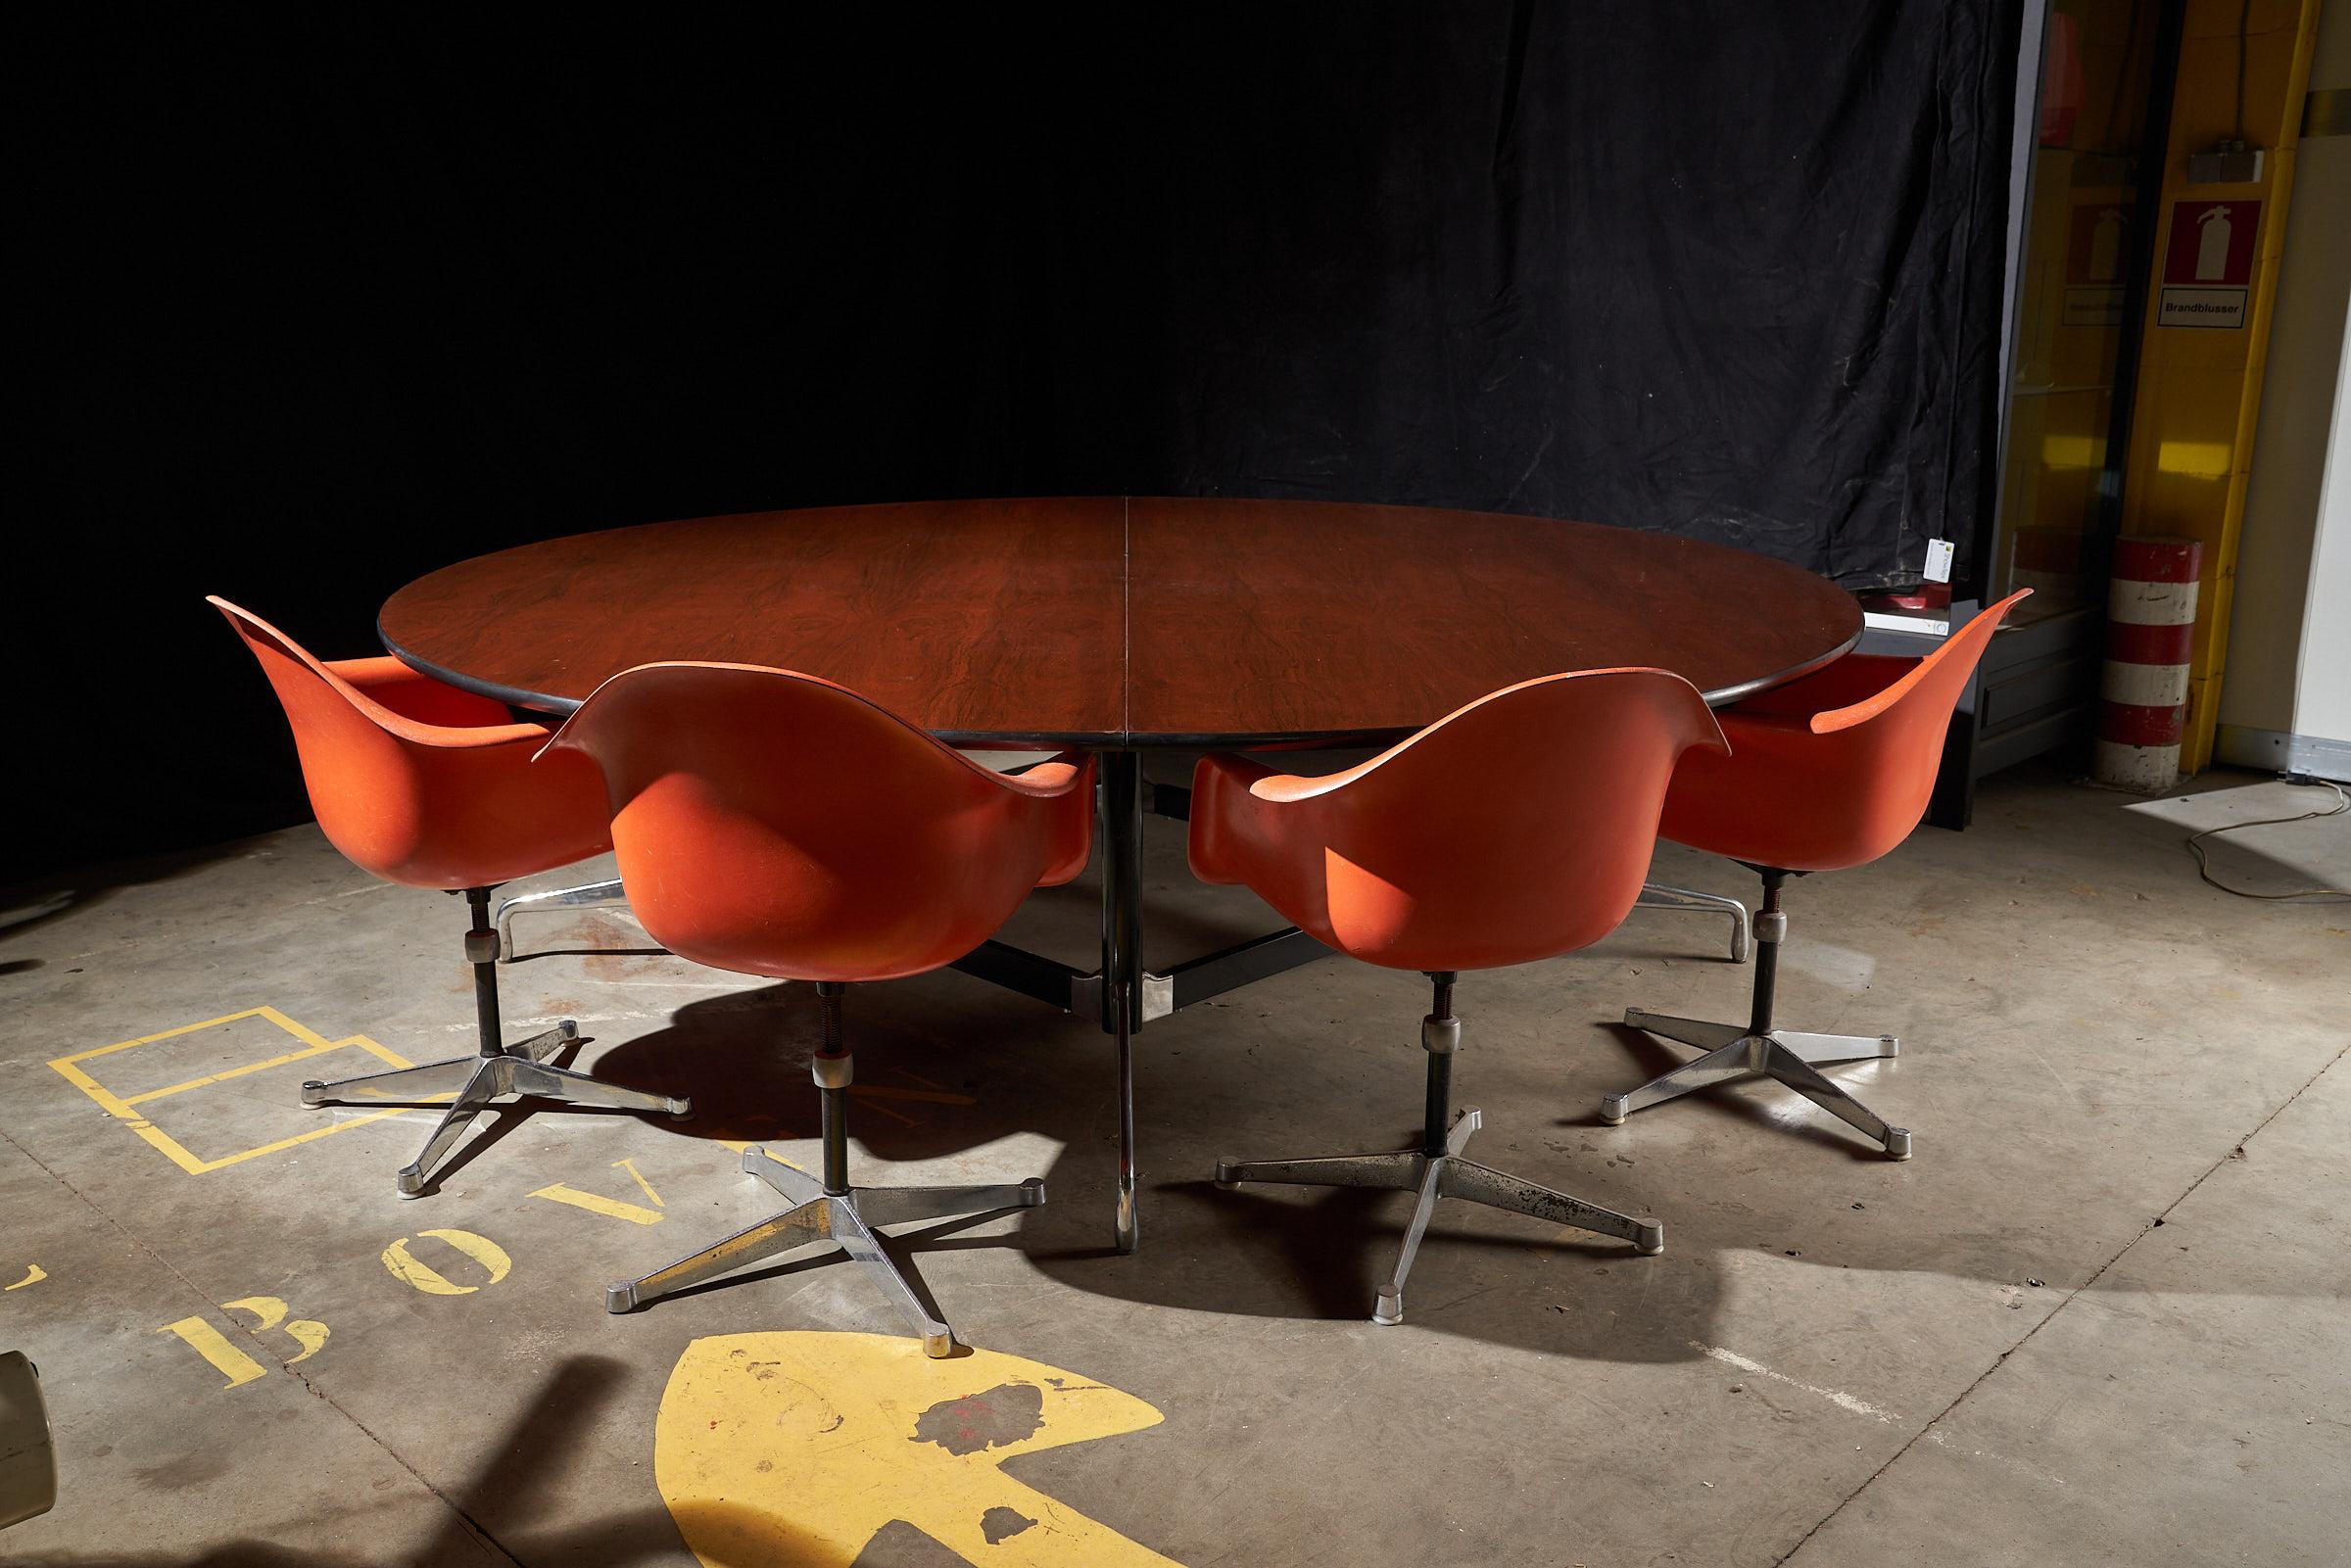 Eames Herman Miller Mid Century Conference Dinning Table, 1960s 245cm Diameter For Sale 4